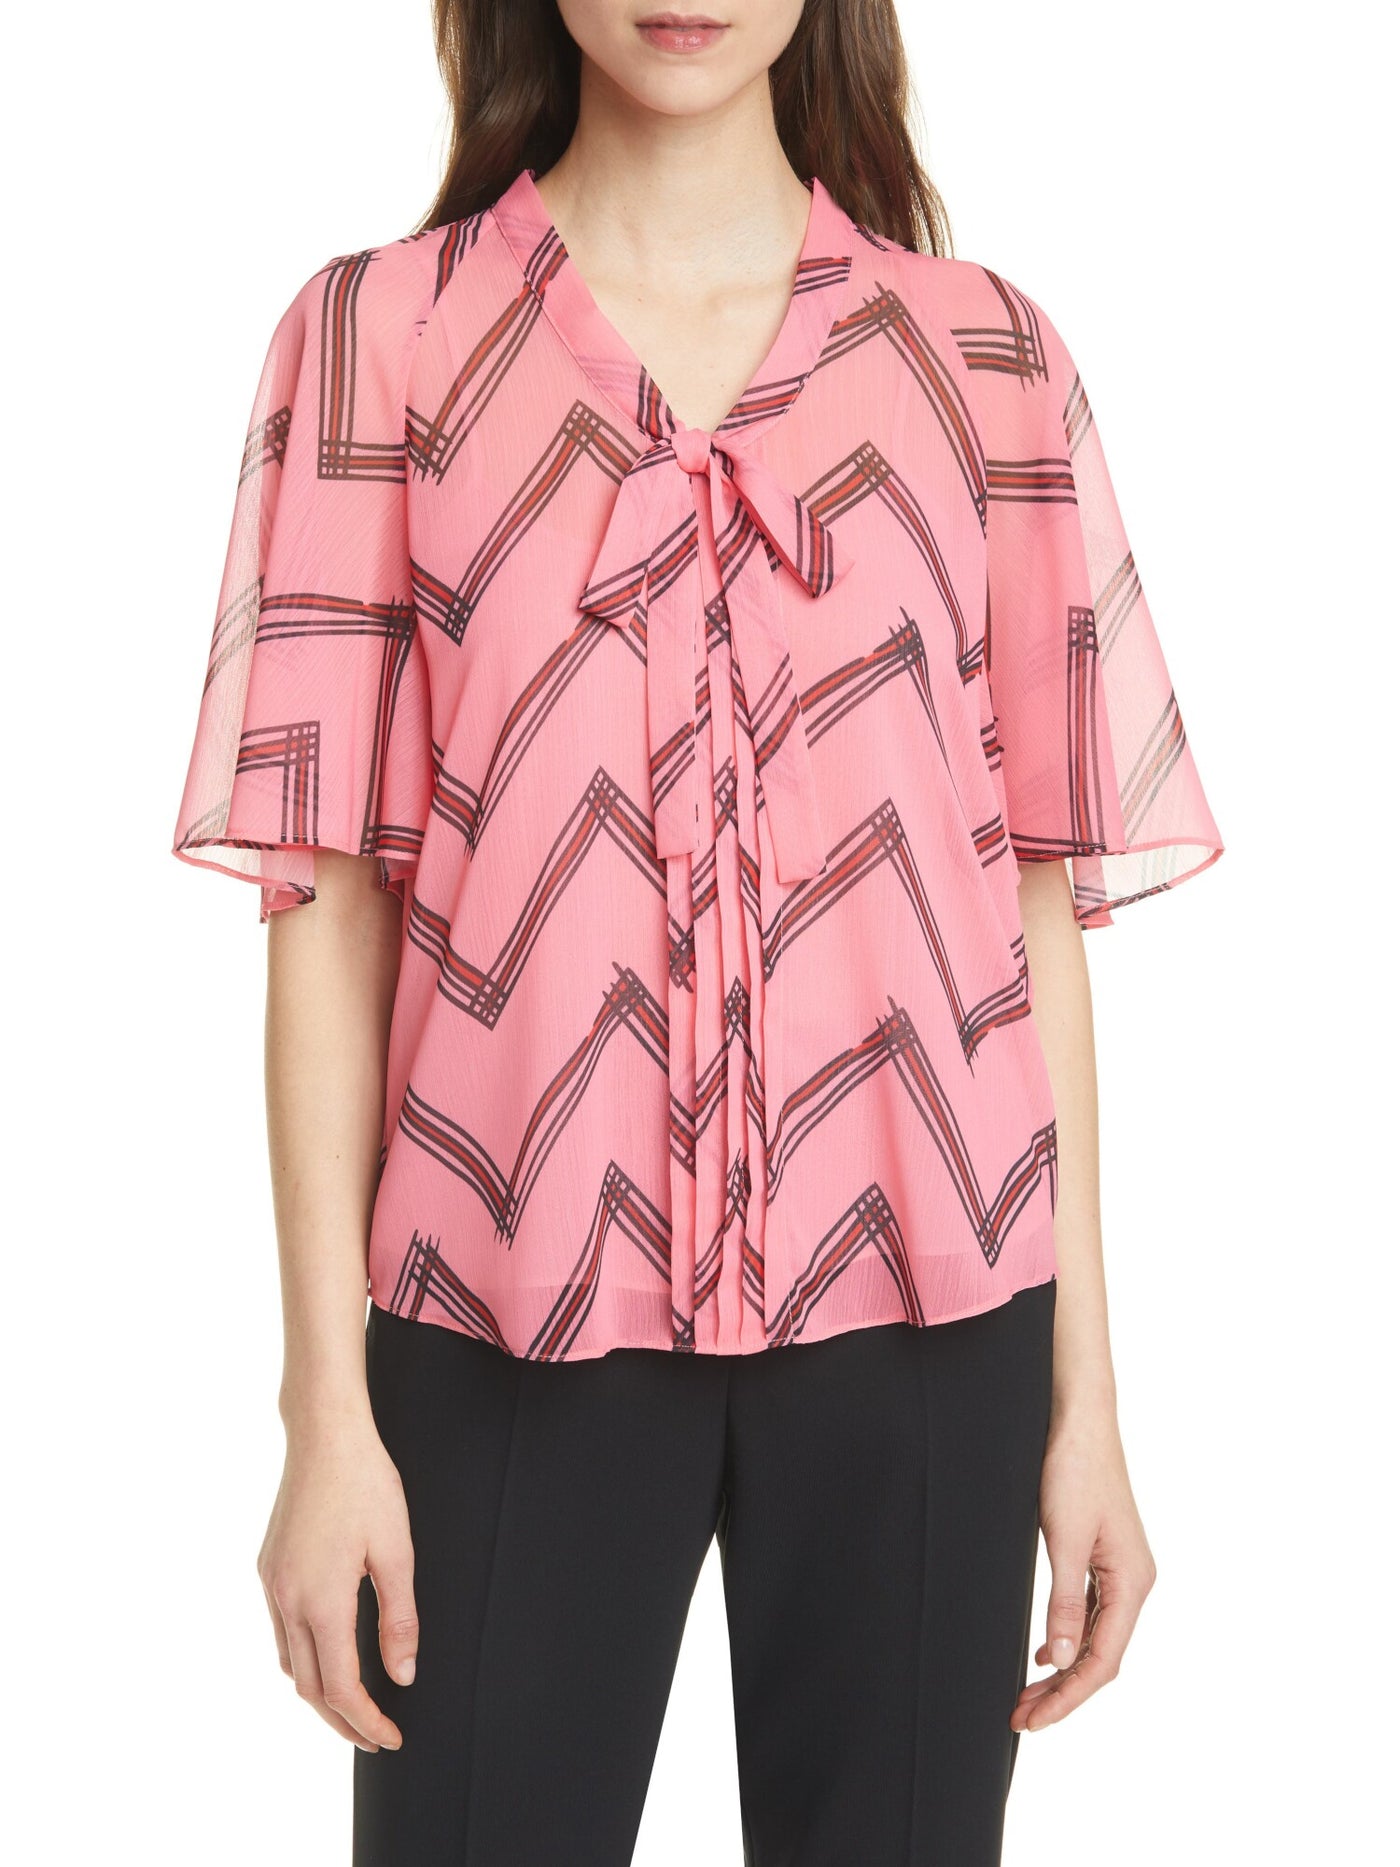 ARMANI Womens Pink Sheer Flutter Printed Short Sleeve Tie Neck Top Size: 40